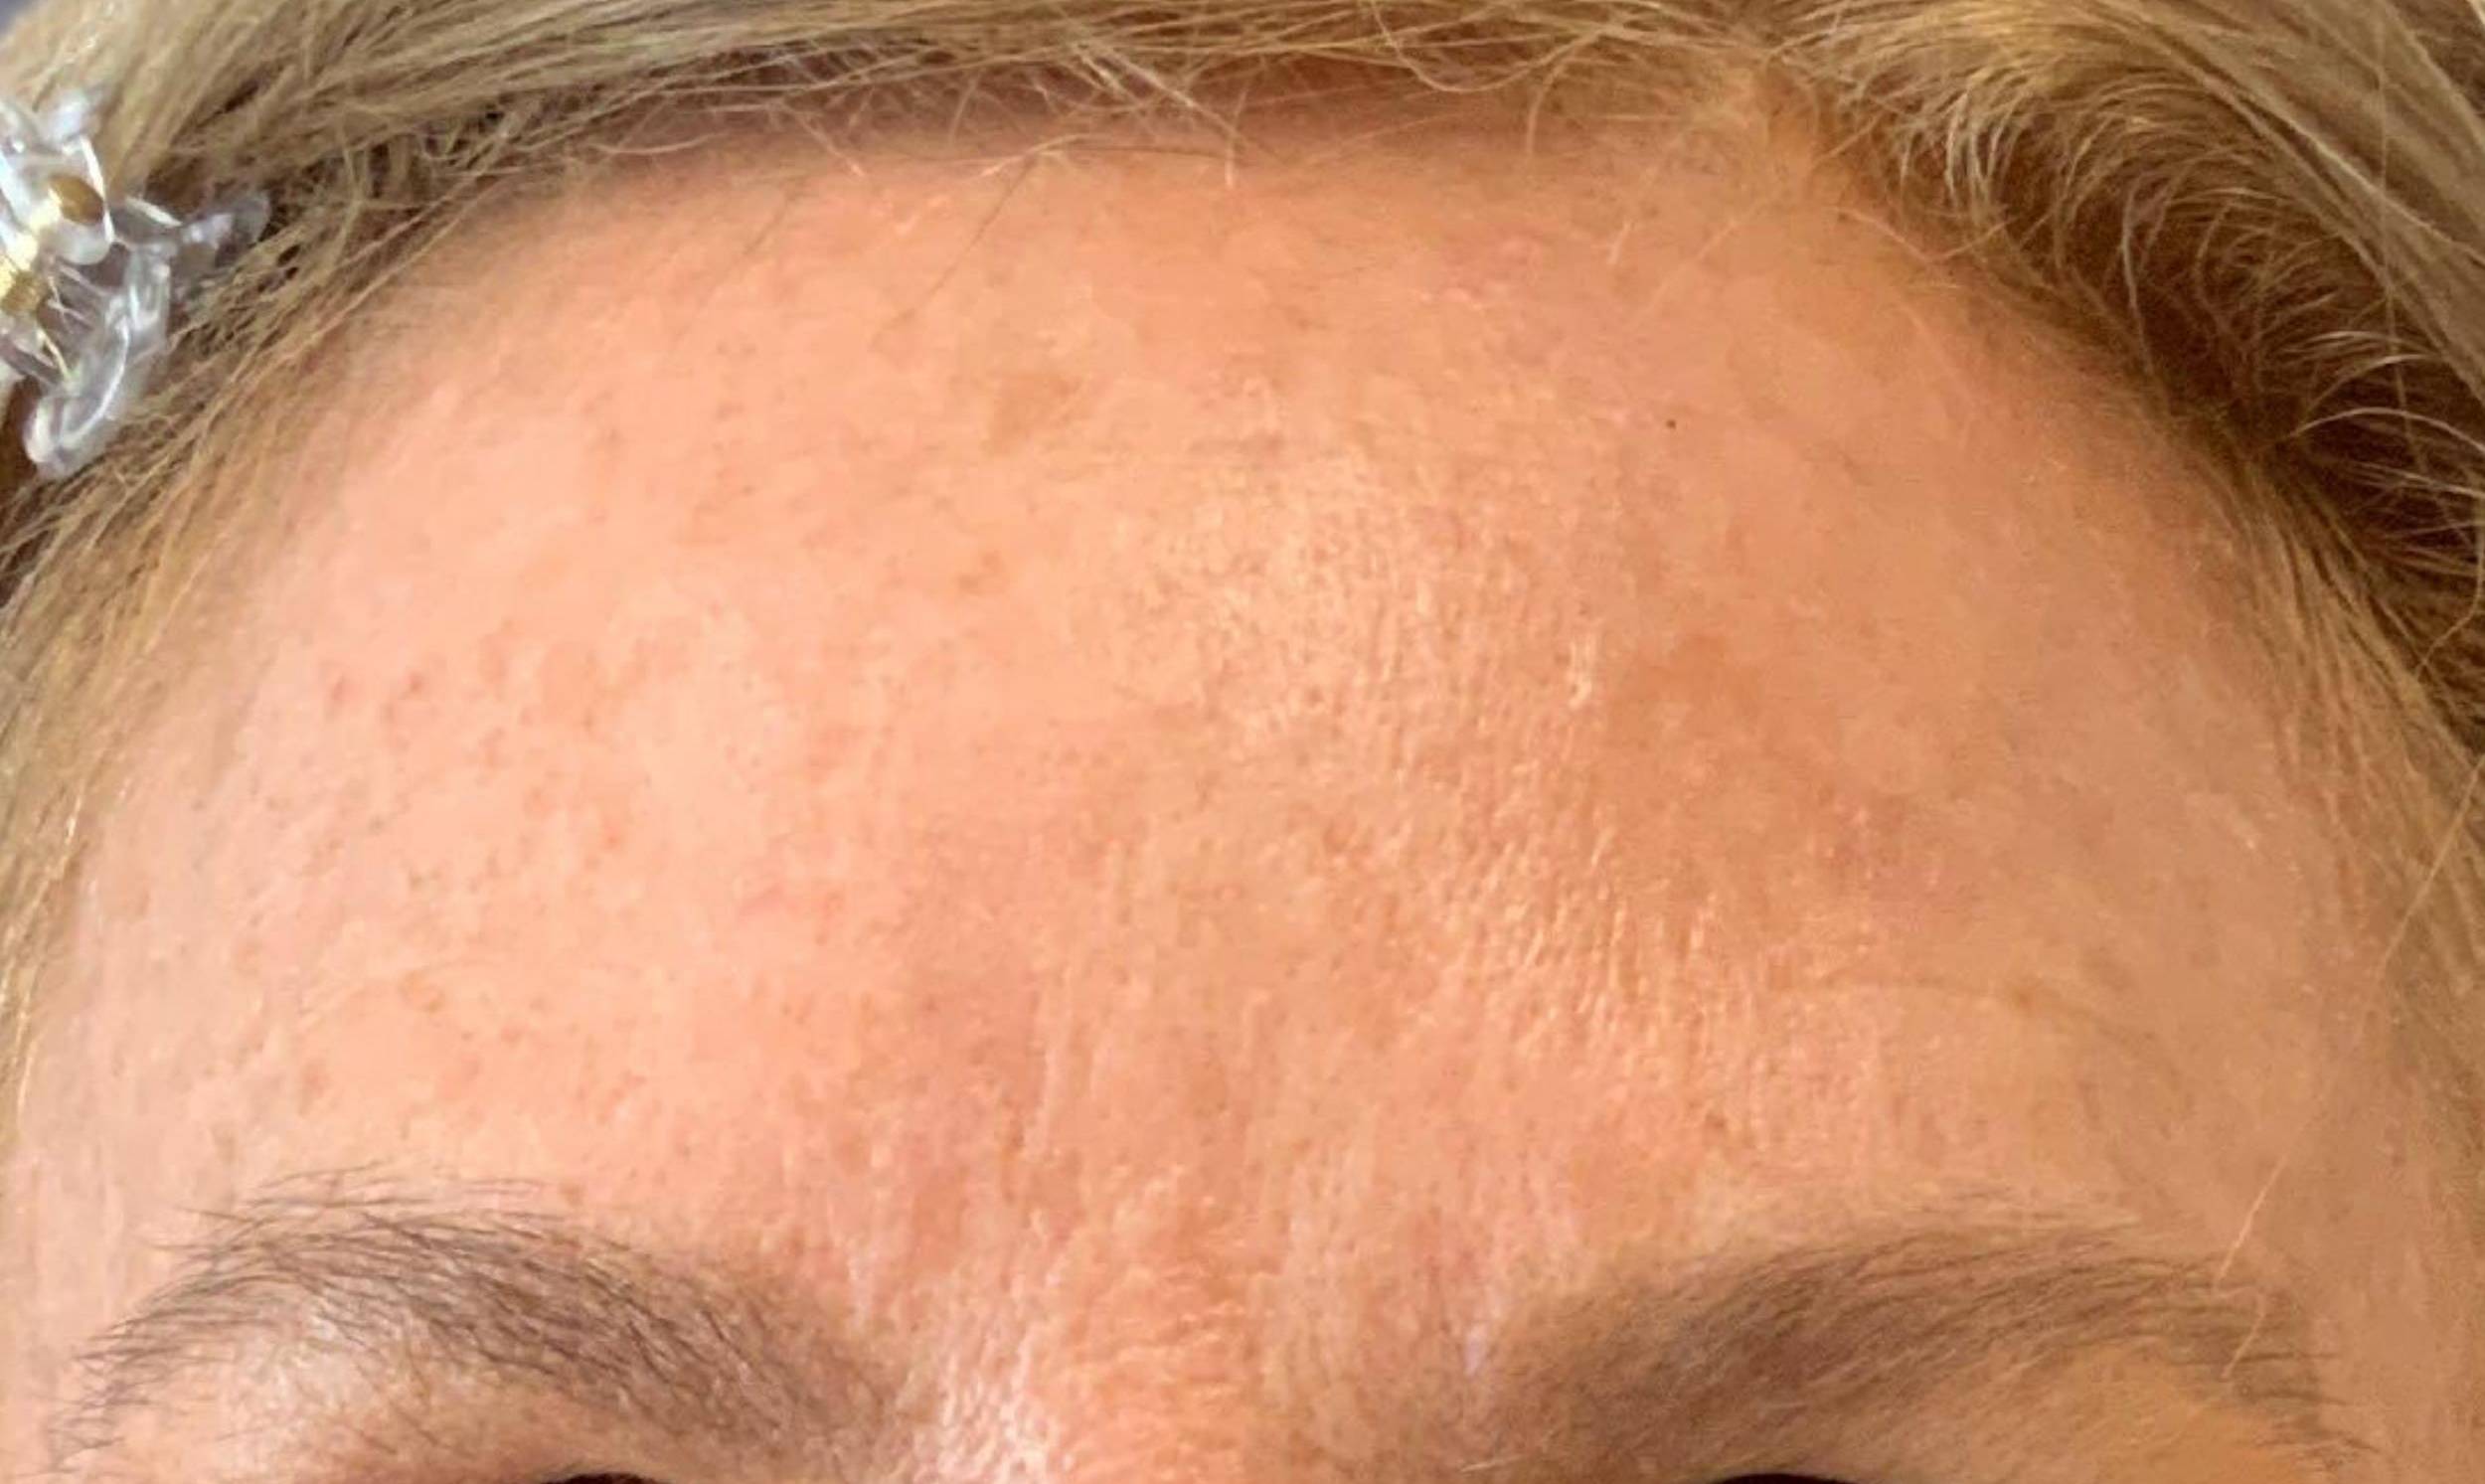 Tox 6 - Botox After